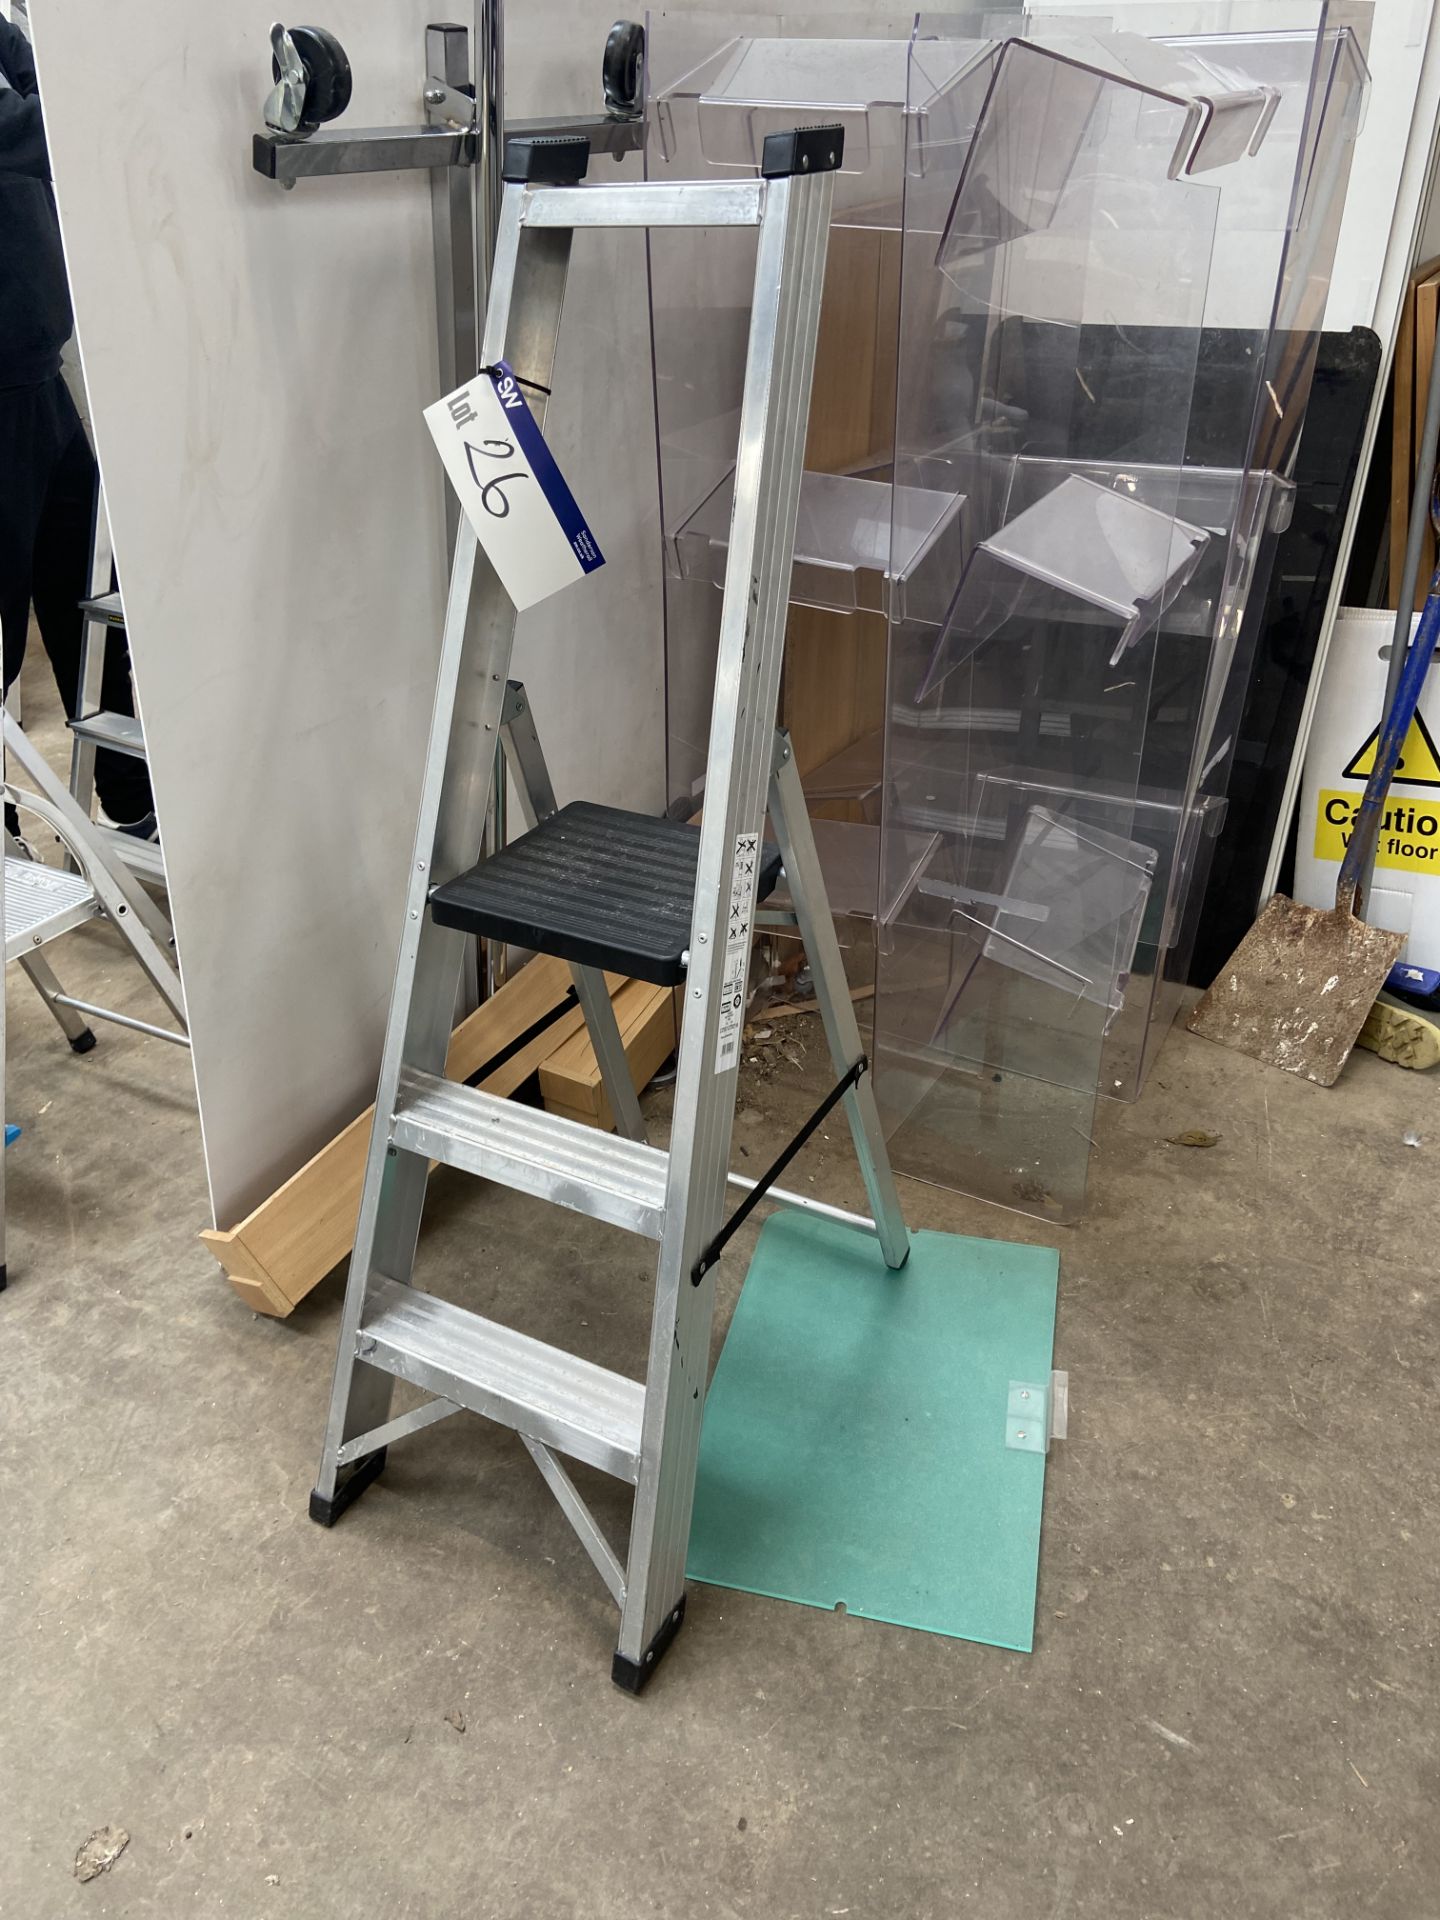 Three Rise Folding Alloy Stepladder, Lot located 33-37 Carron Place, East Kilbride, North